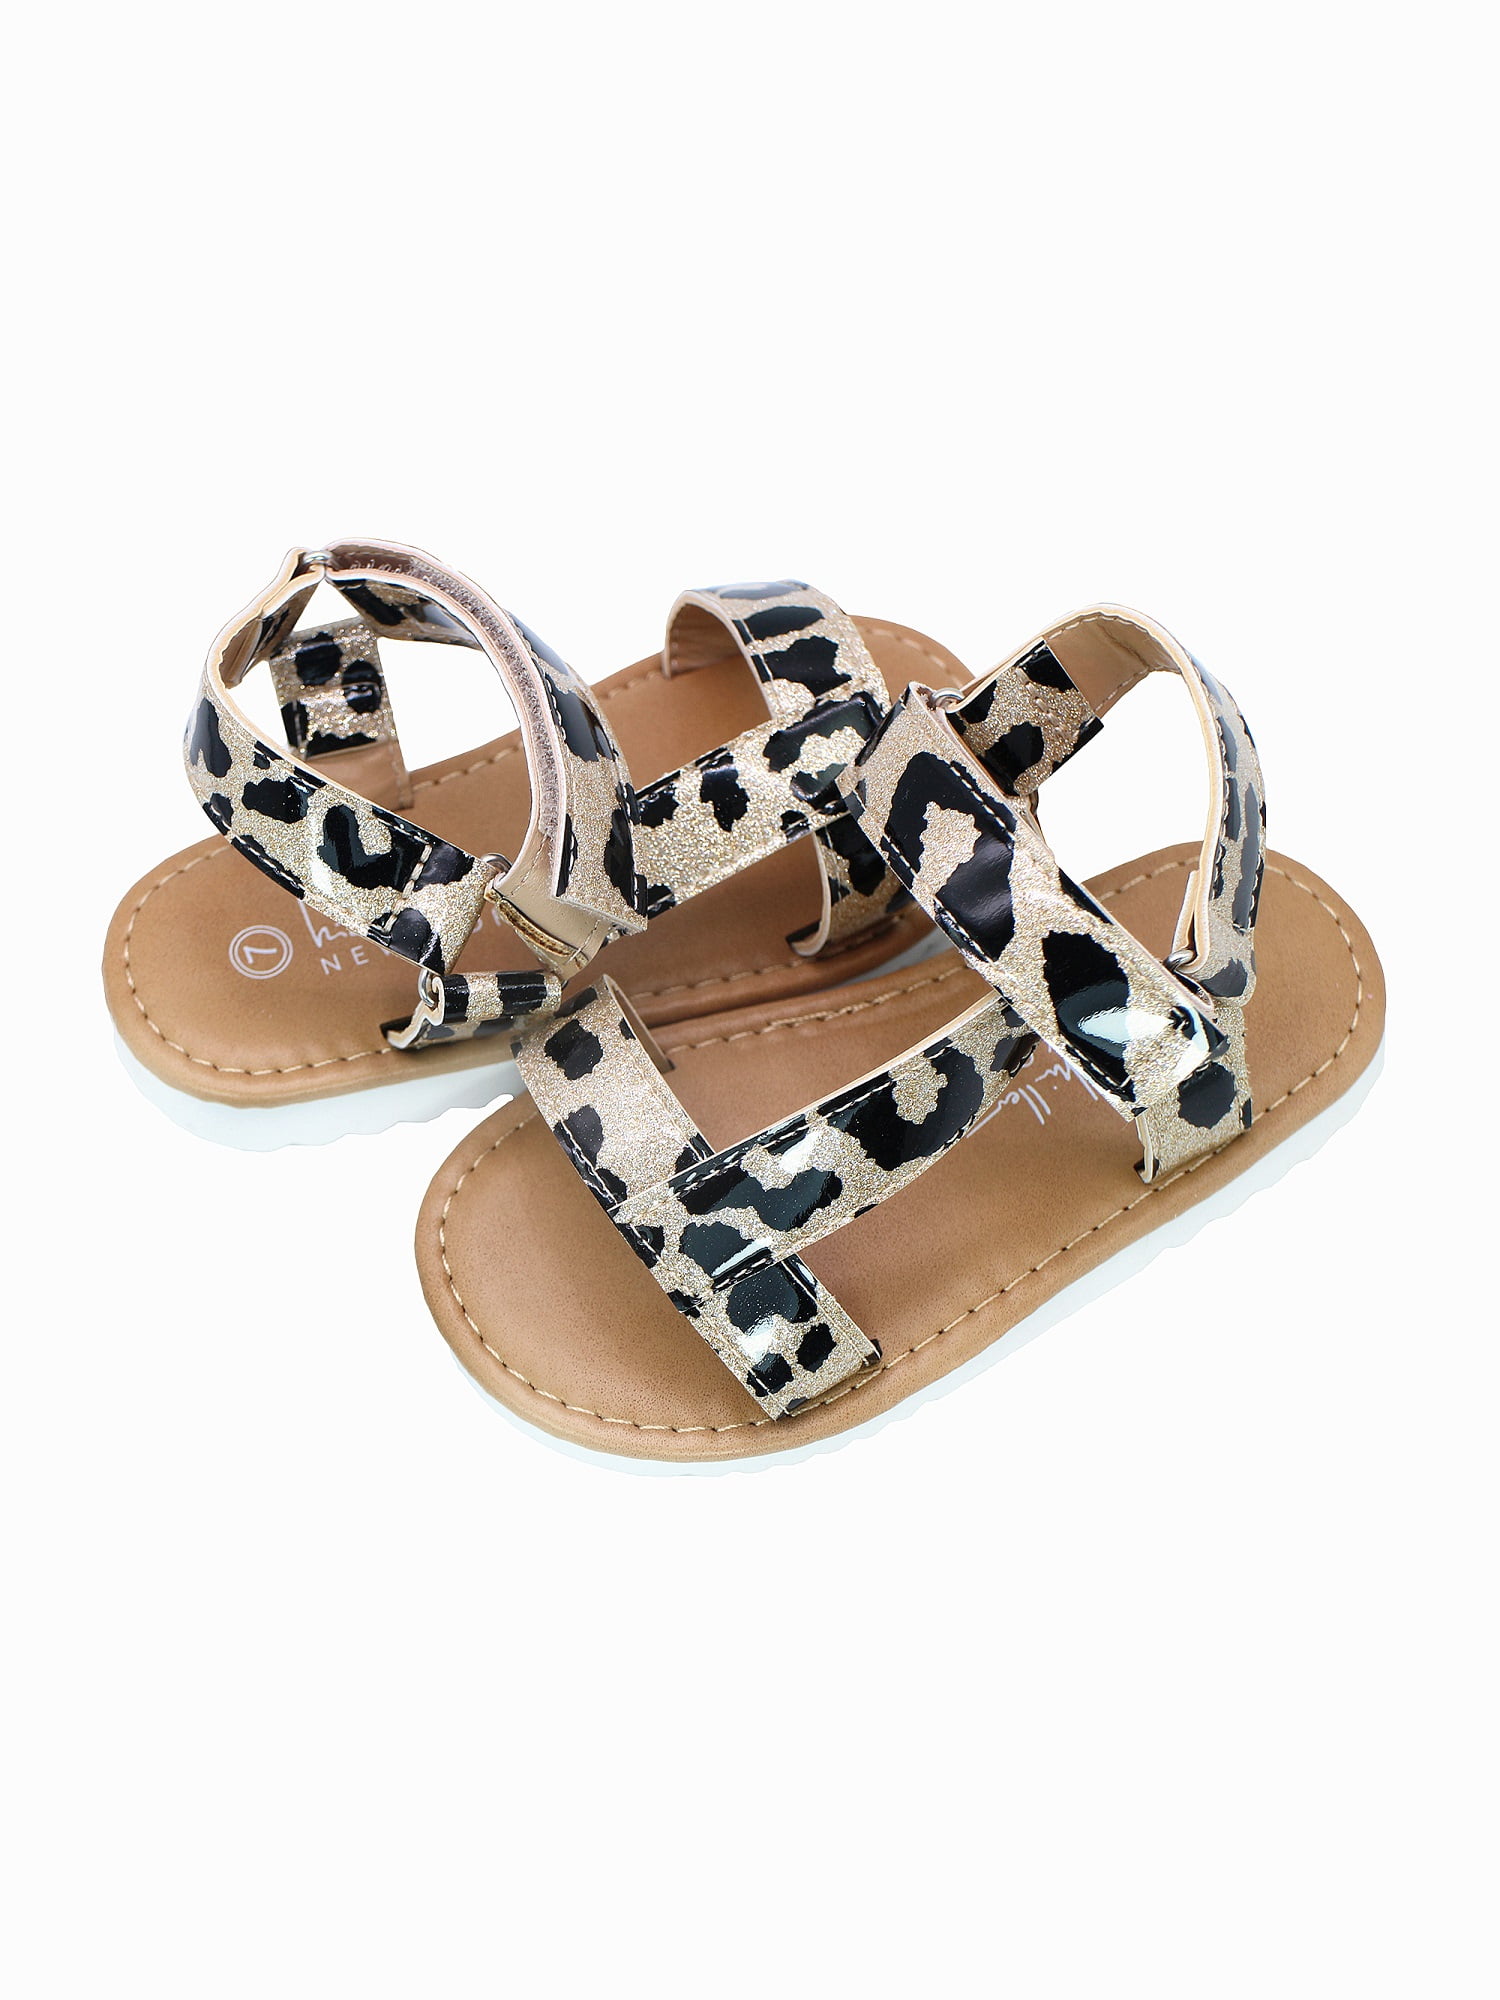 Boys & Girls Adjustable Hook and Loop Sandals with Buckle Straps